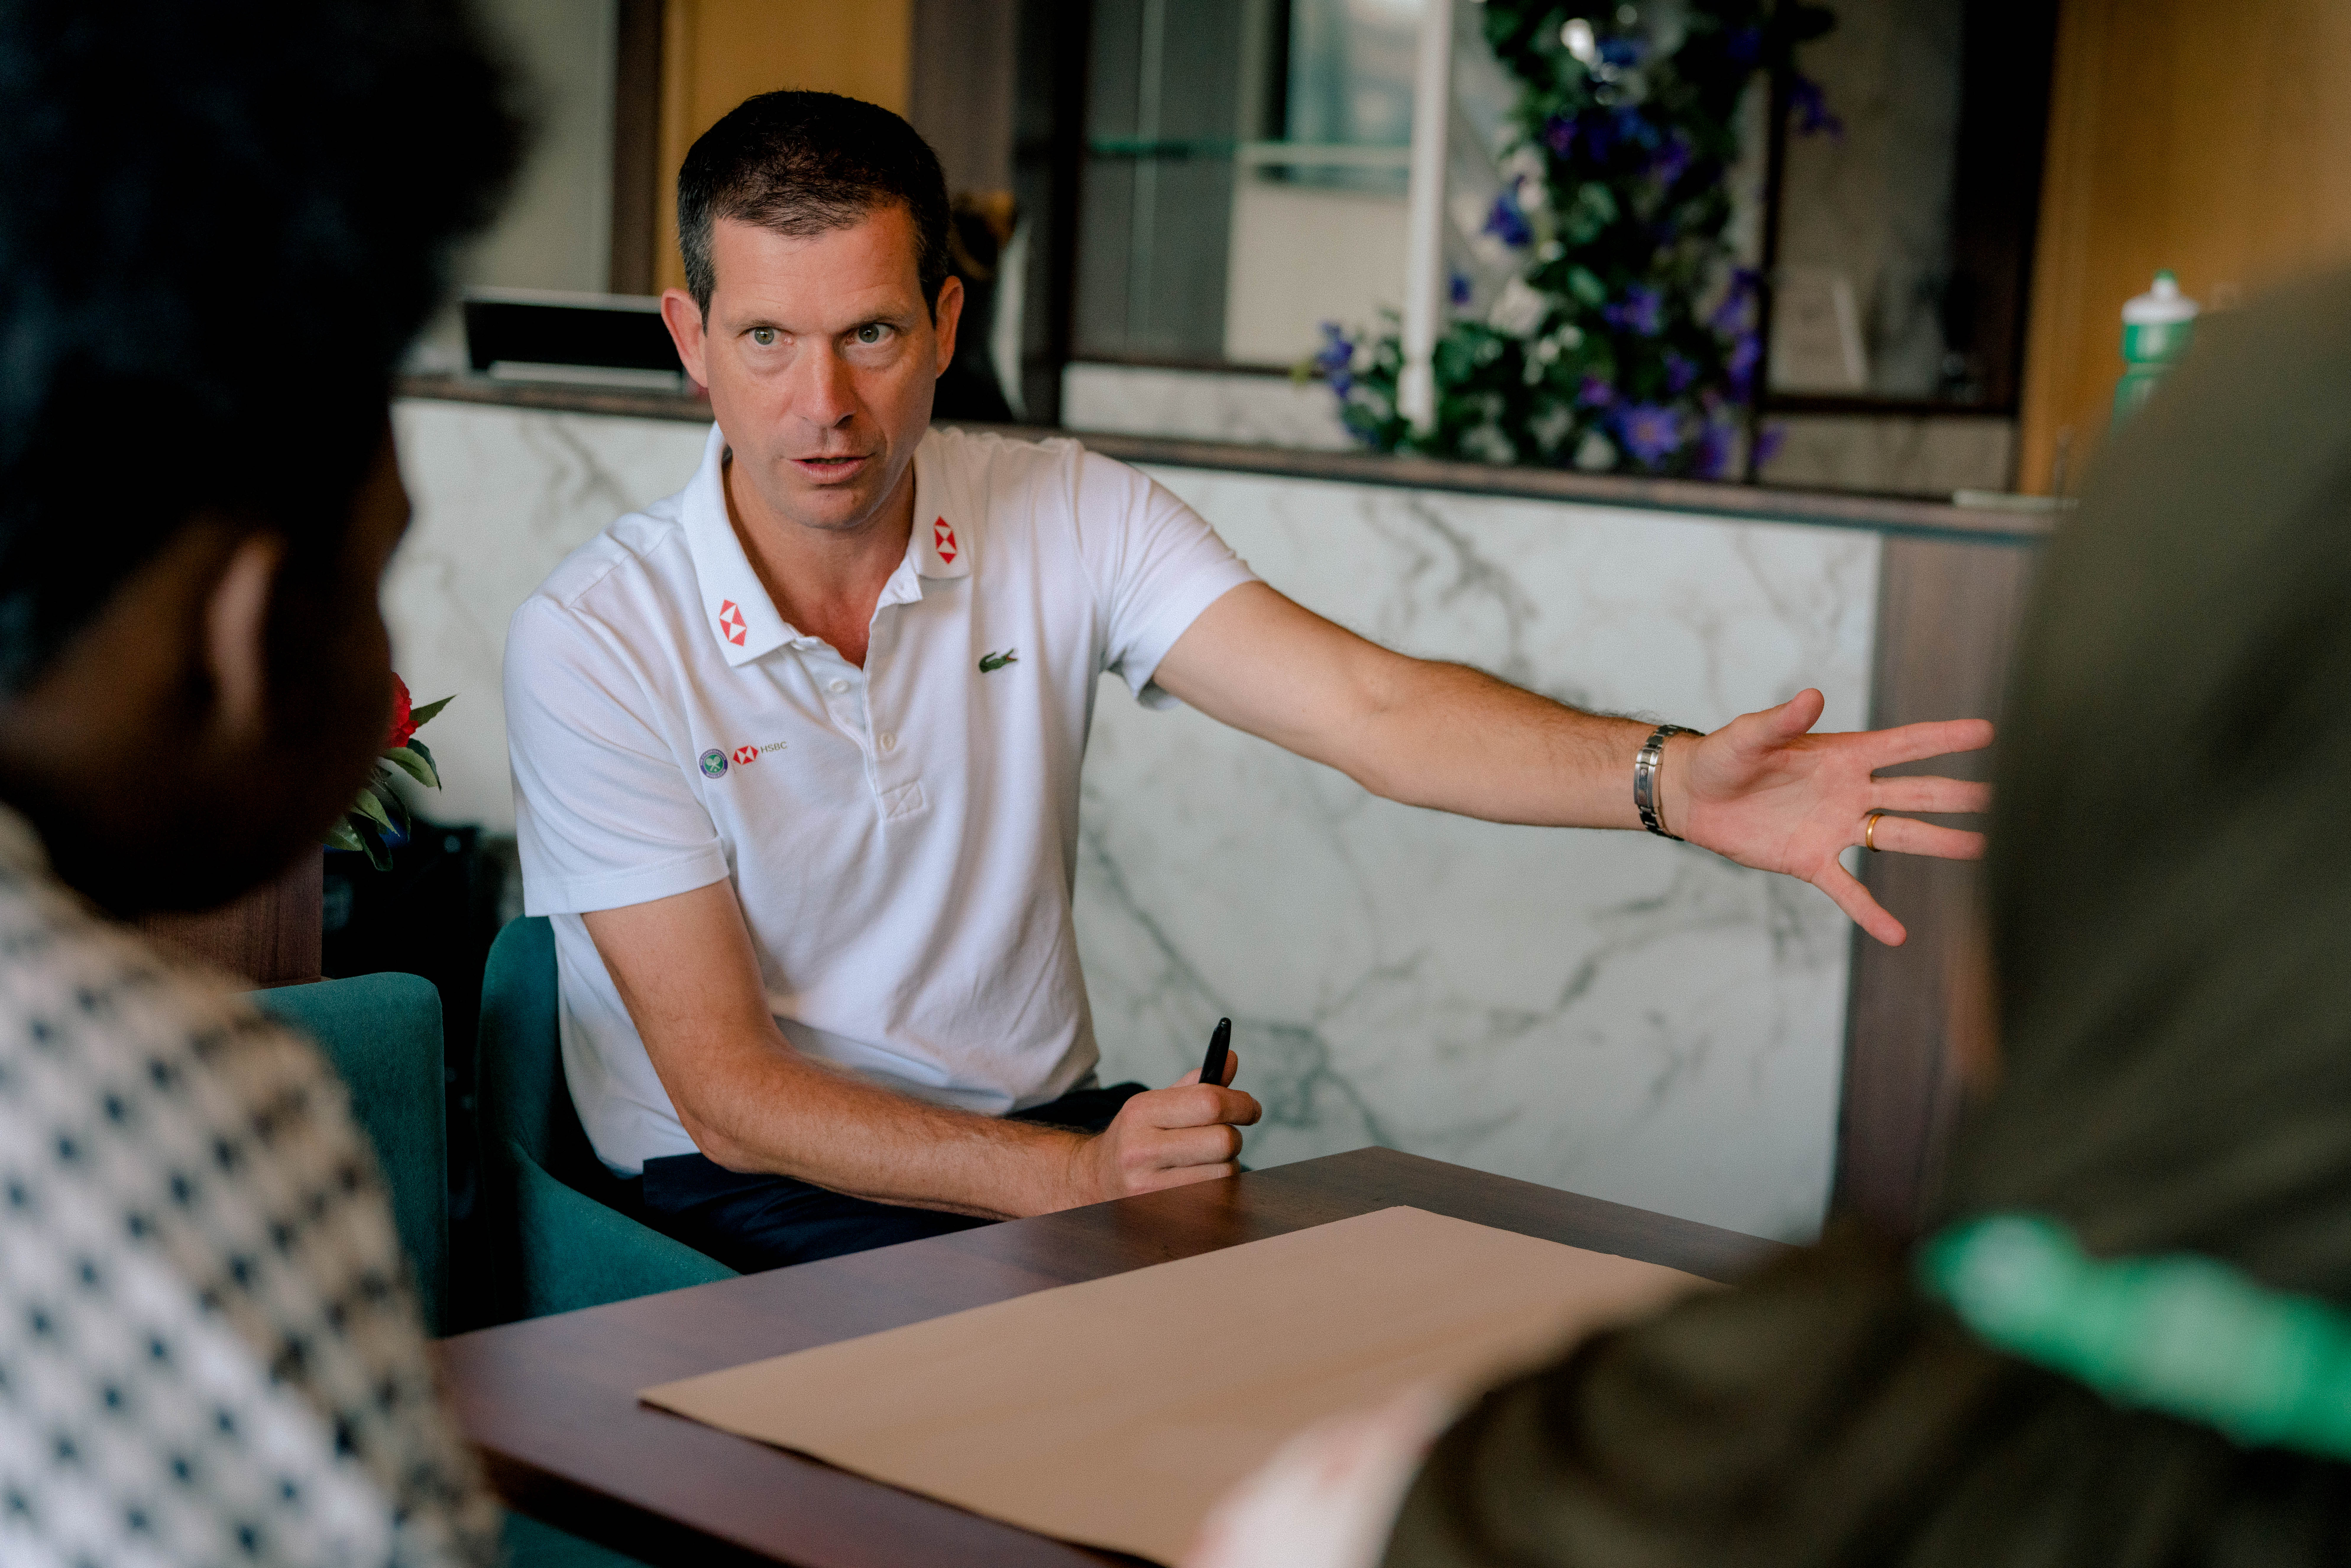 Tim Henman hosts HSBC's World of Opportunity Programme at Wimbledon showcasing the different career opportunities available in sport beyond the court